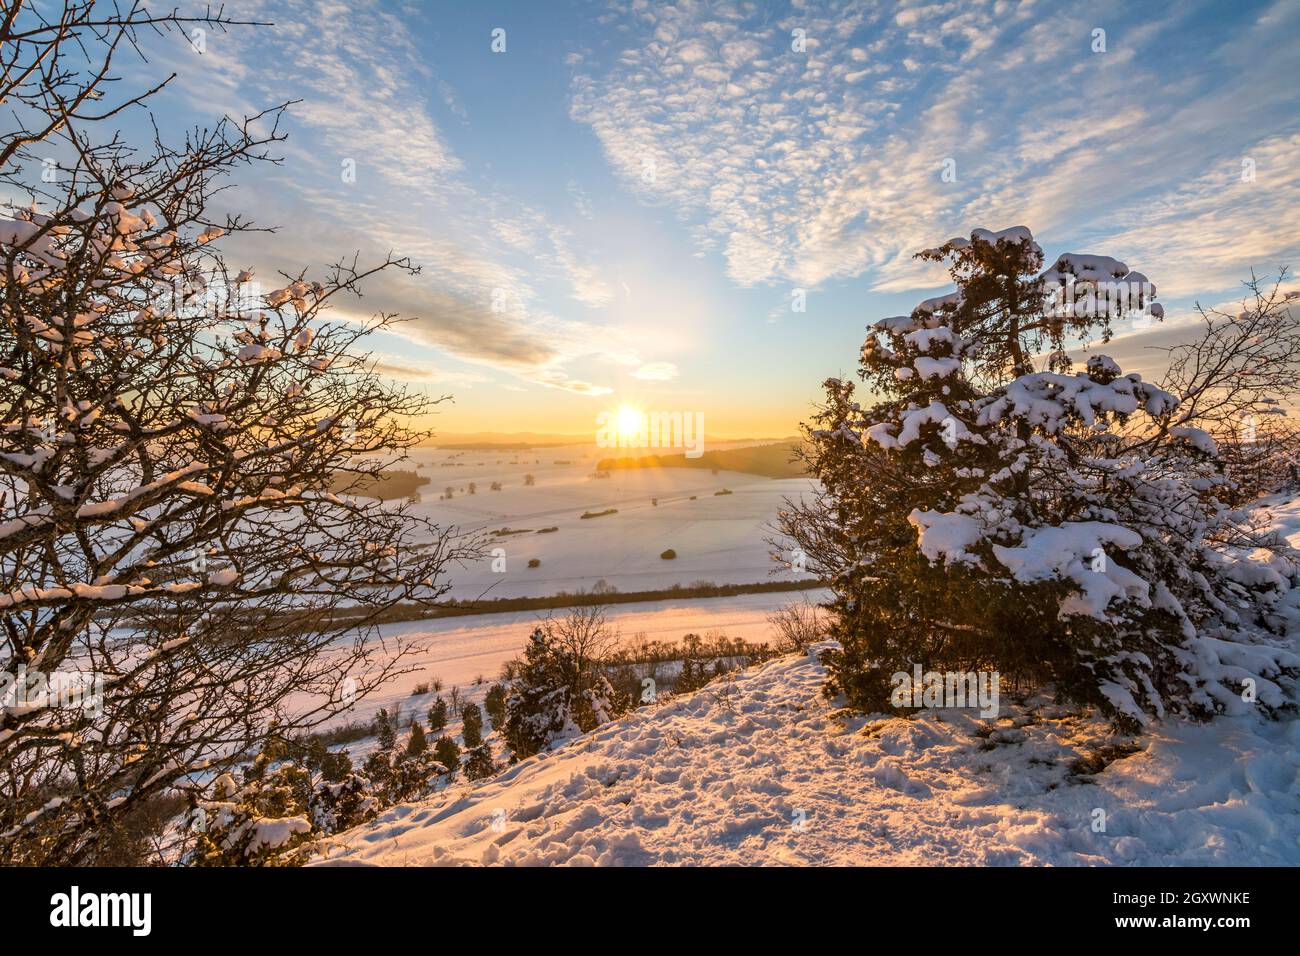 Beautiful colourful sunset over winter landscape in the Swabian Alps with trees in the foreground Stock Photo